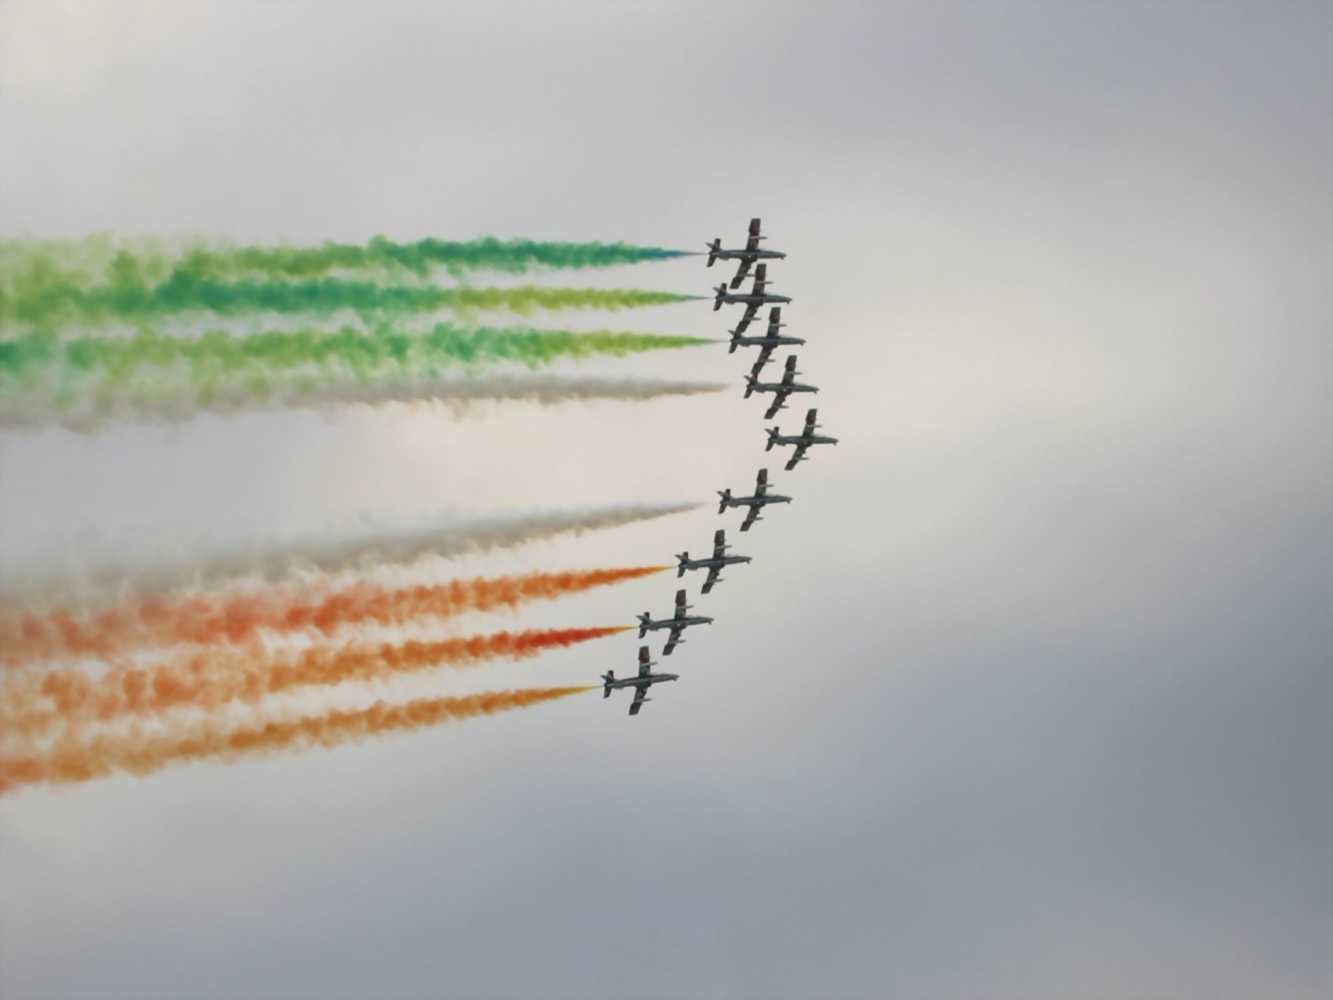 Frecce Tricolori flying over the Rivolto airbase: 39 KB; click on the image to the enlarge